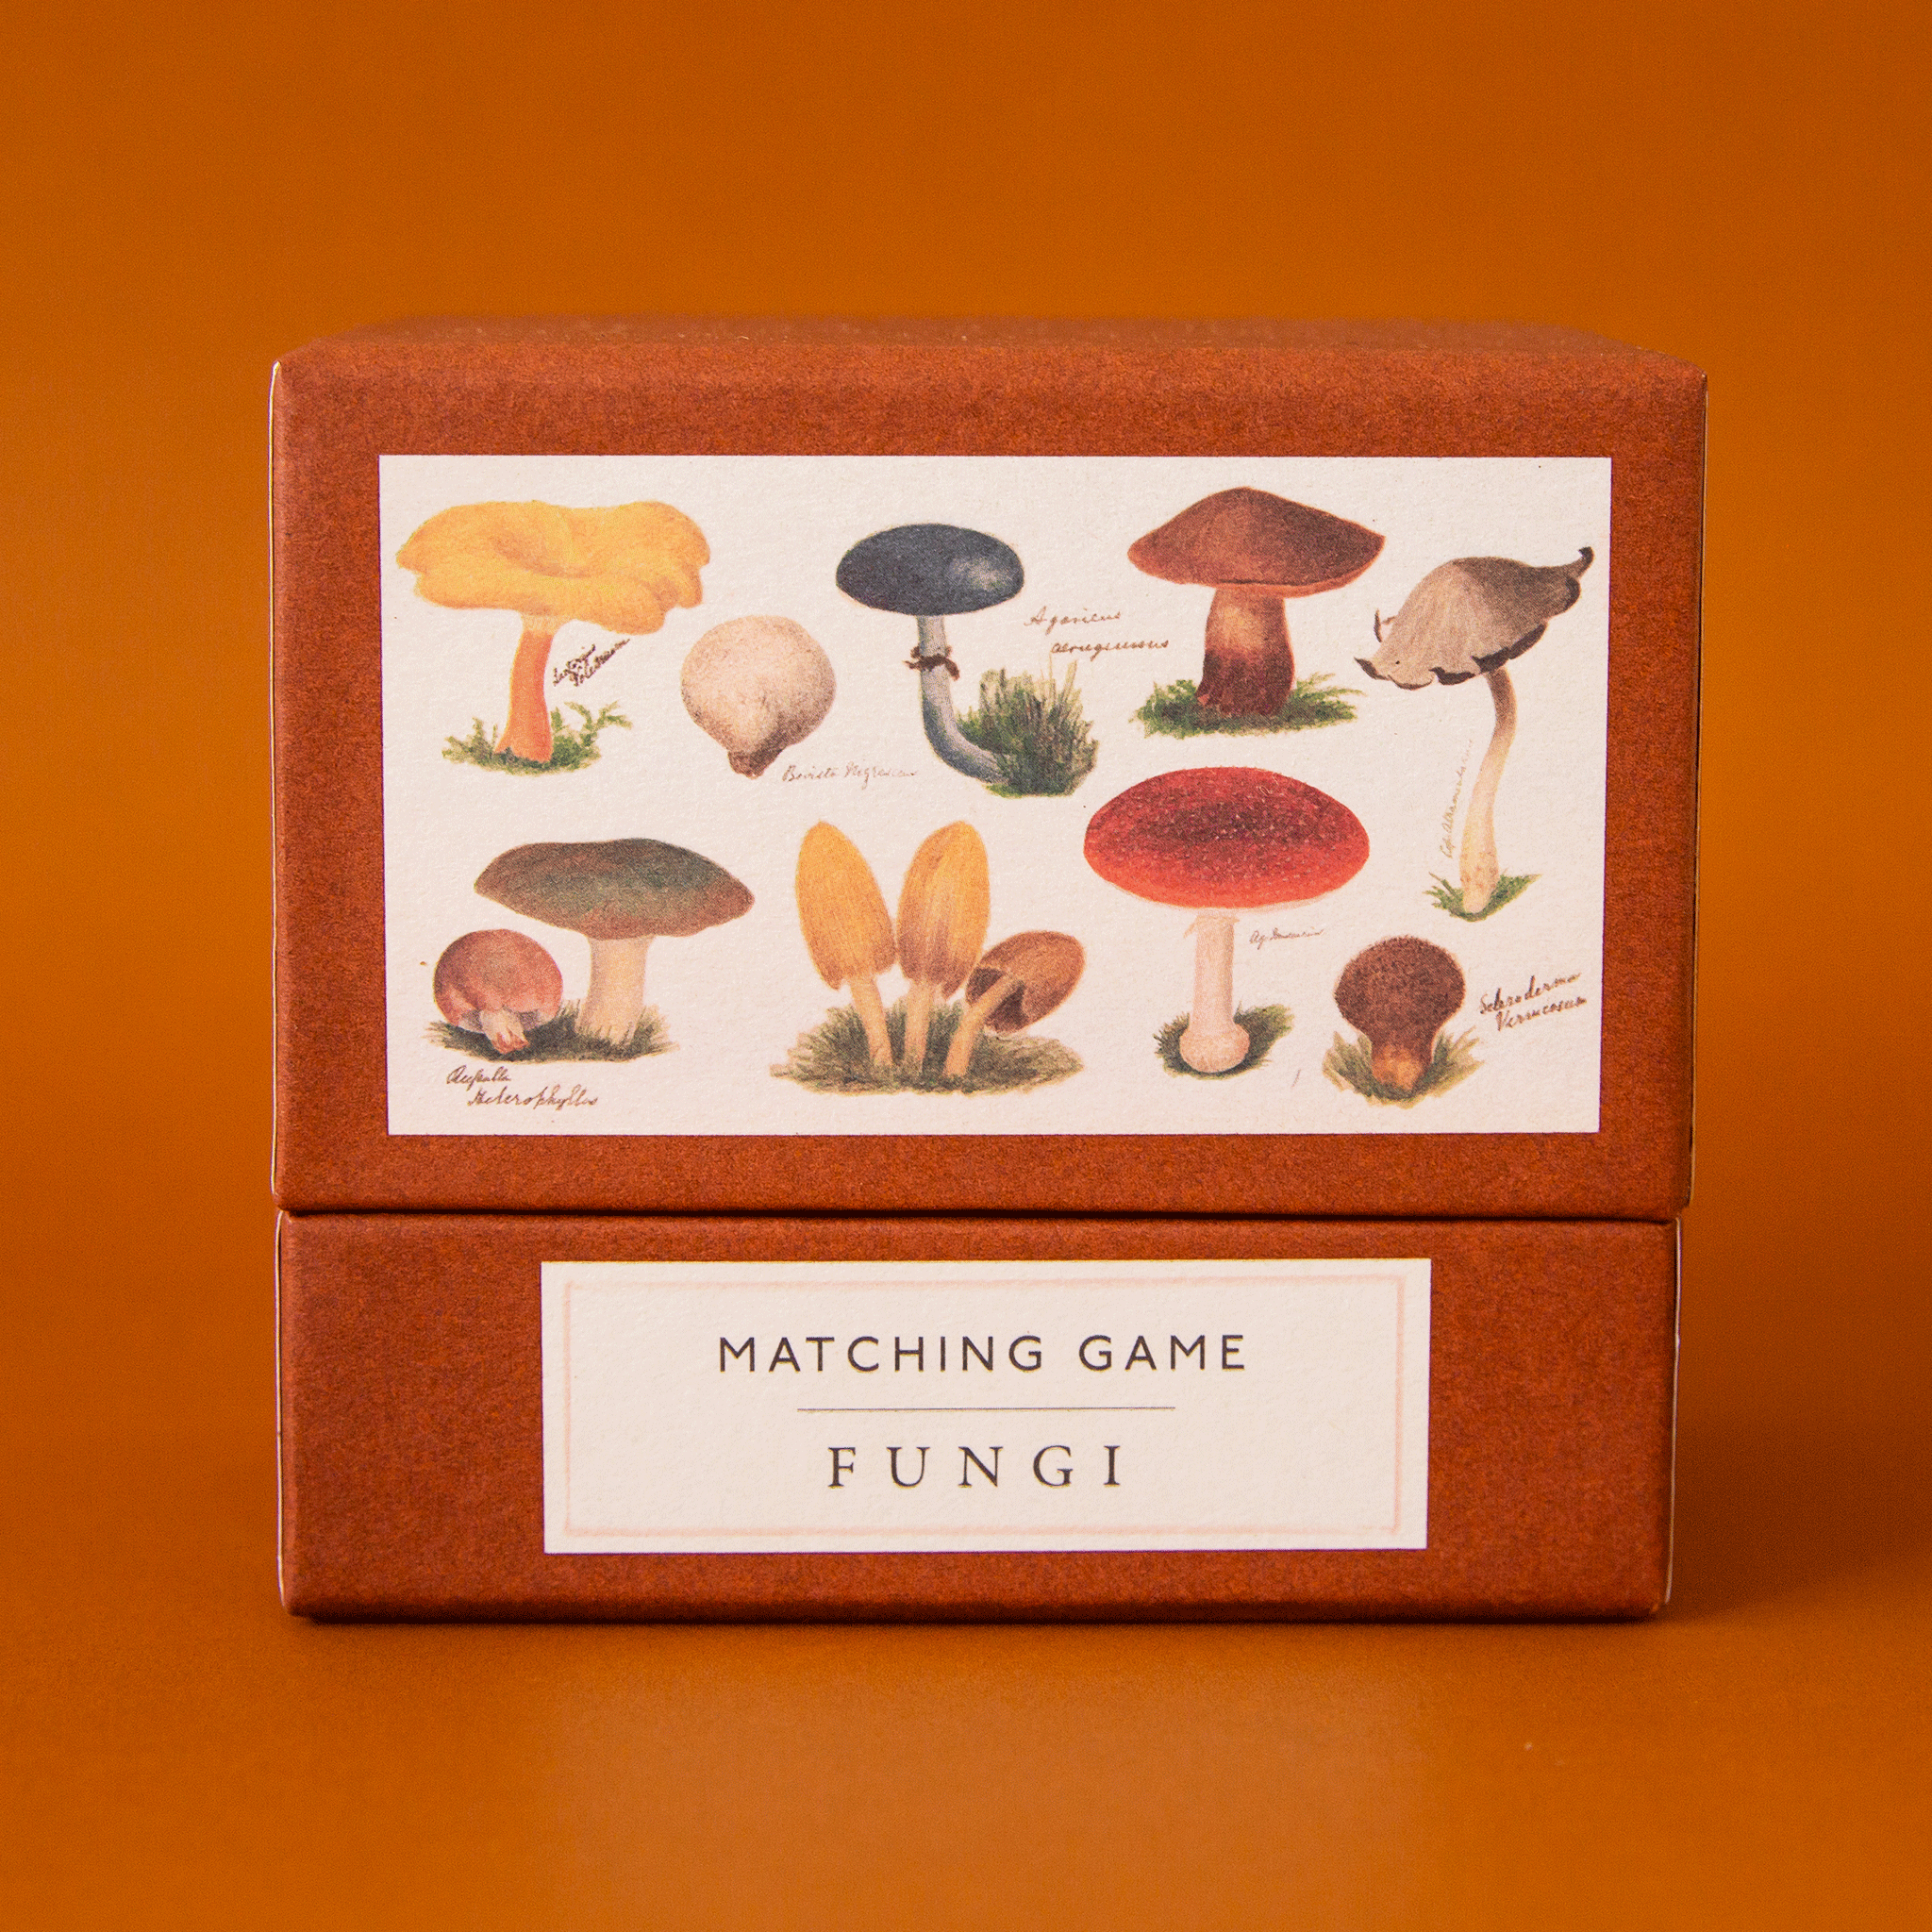 On an orange background is a burnt orange box with an assortment of mushrooms along with, &quot;Matching Game Fungi&quot;.